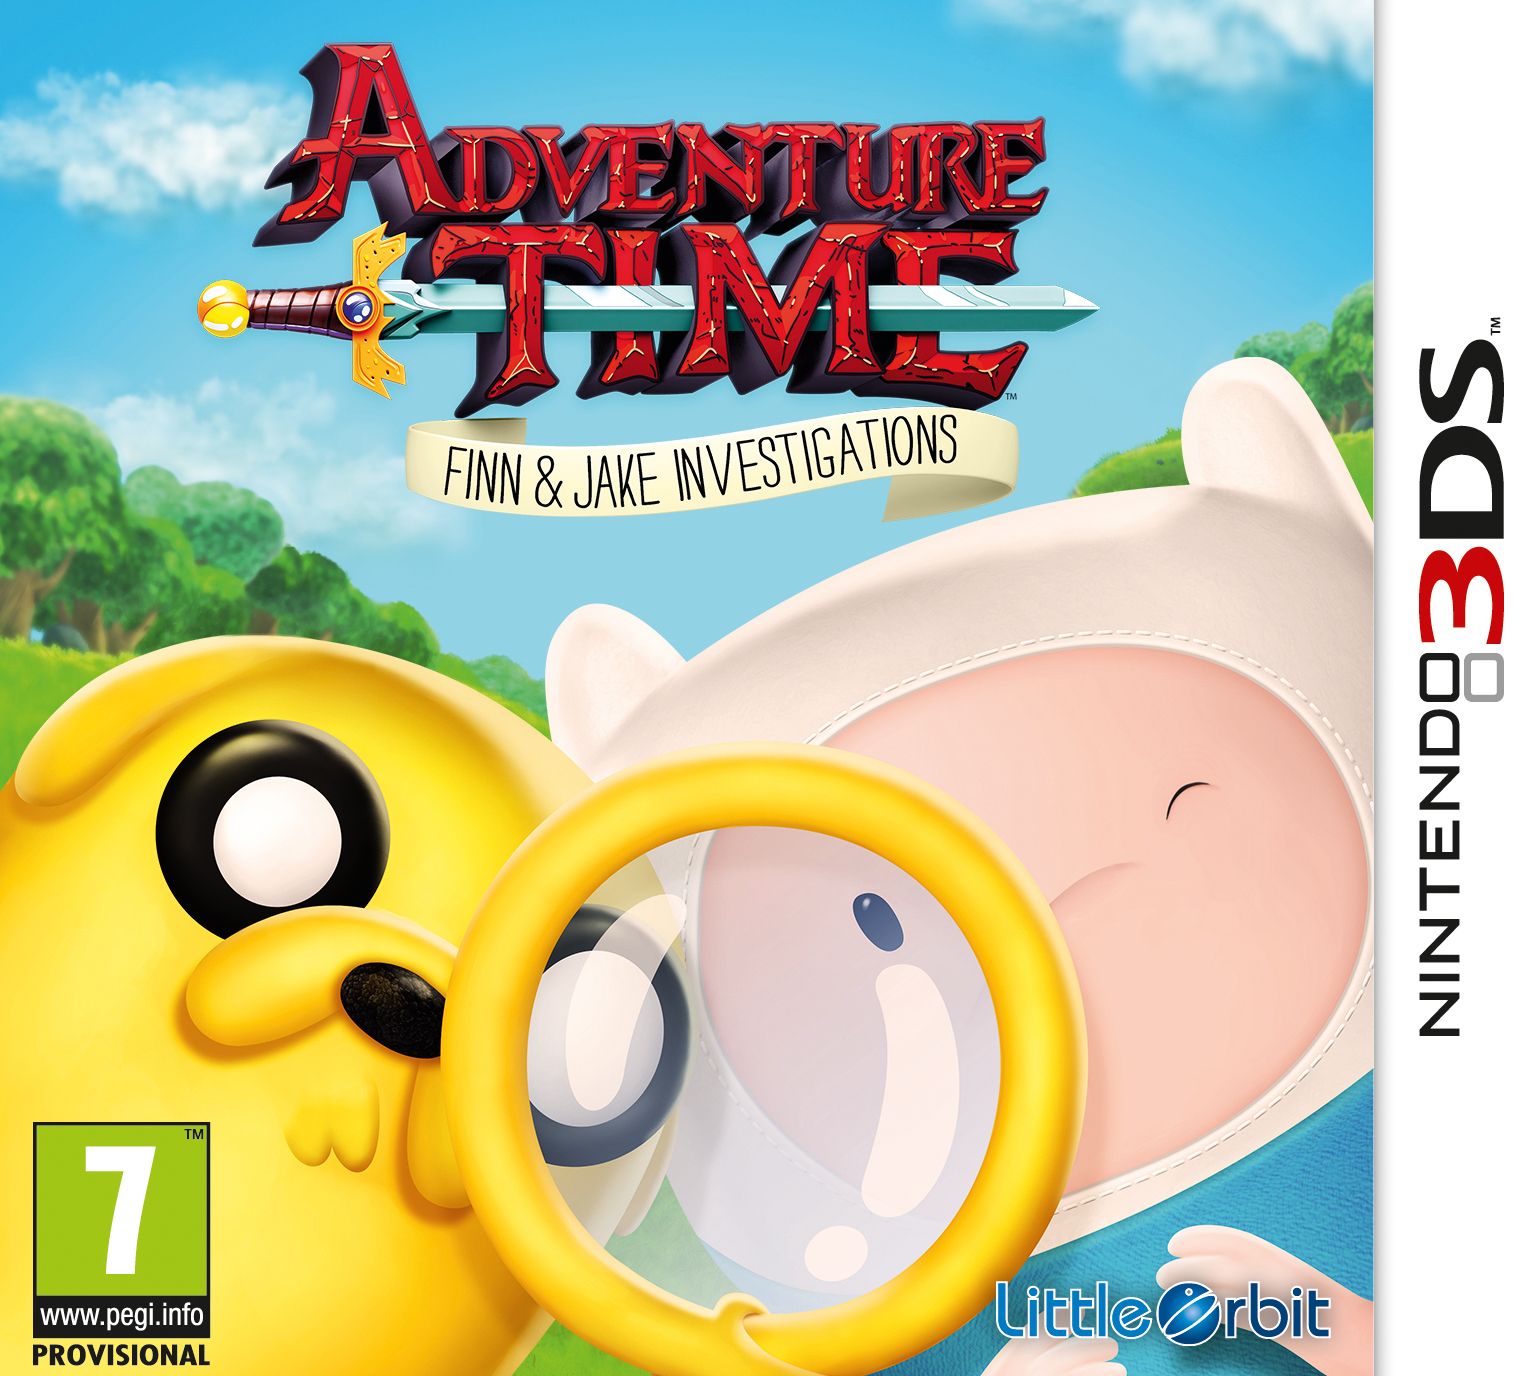 Adventure Time: Finn & Jake Investigations (3DS), Vicious Cycle Software